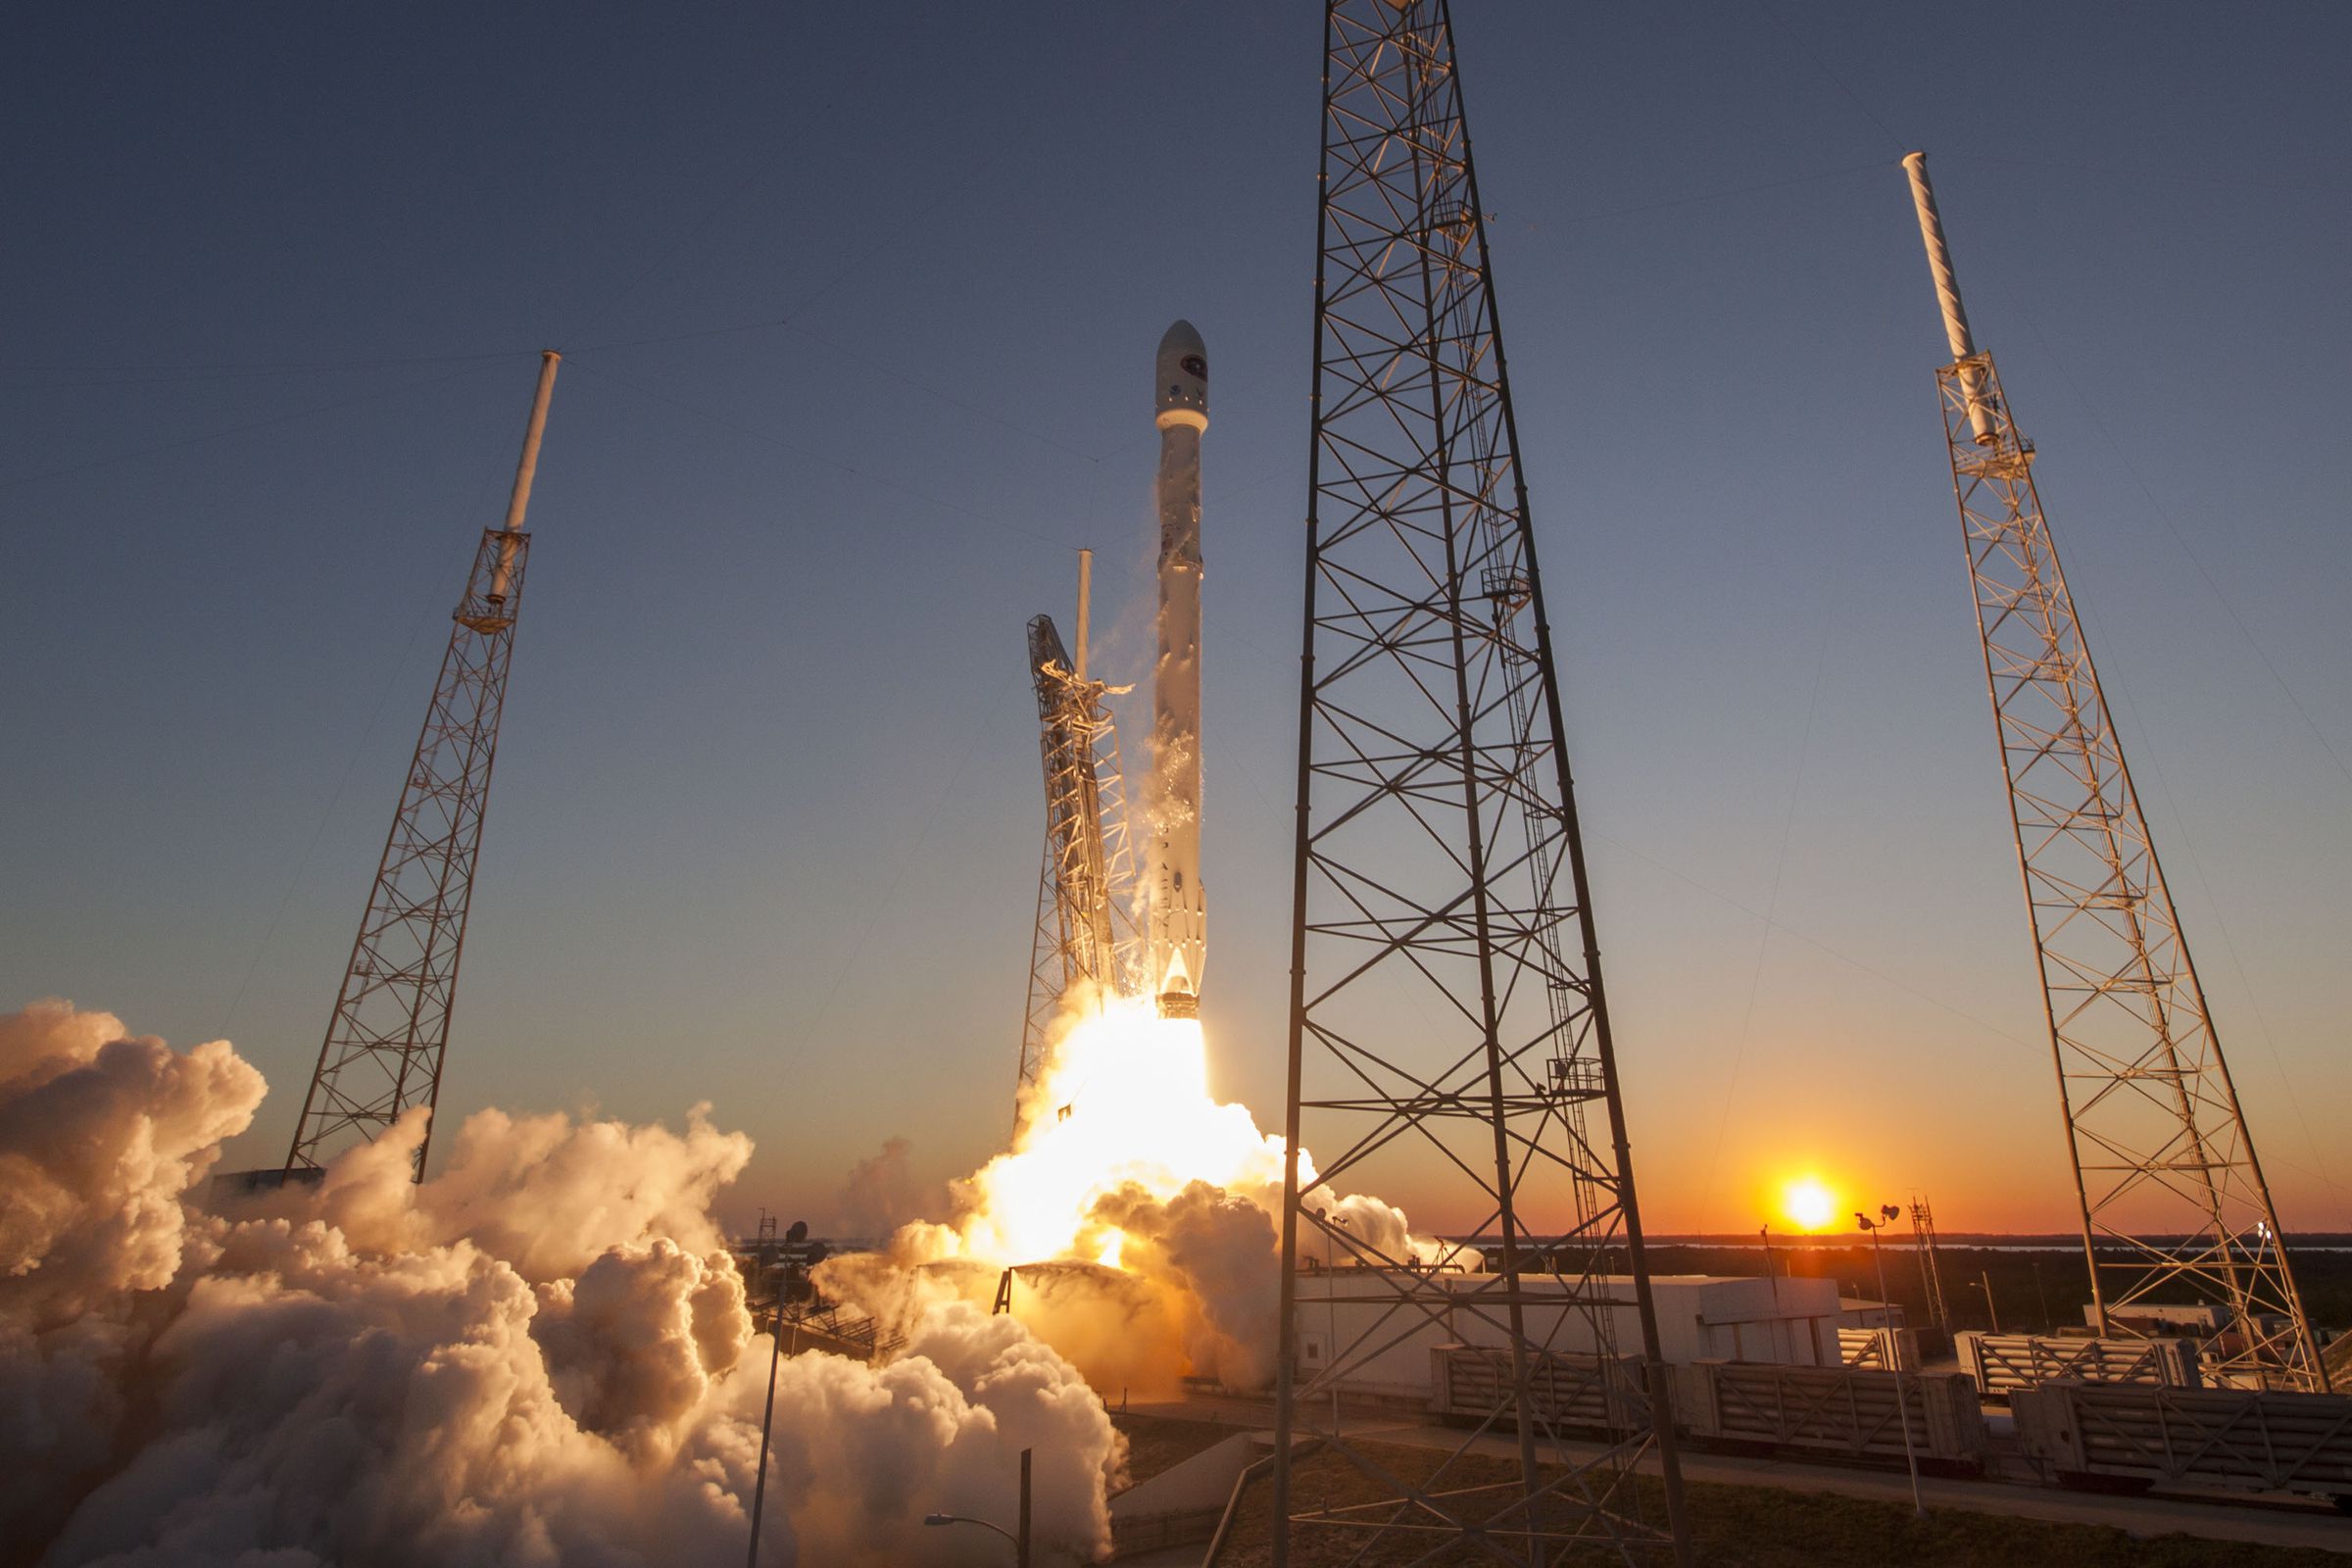 A Falcon 9 rocket taking off from SLC-40 in 2015.